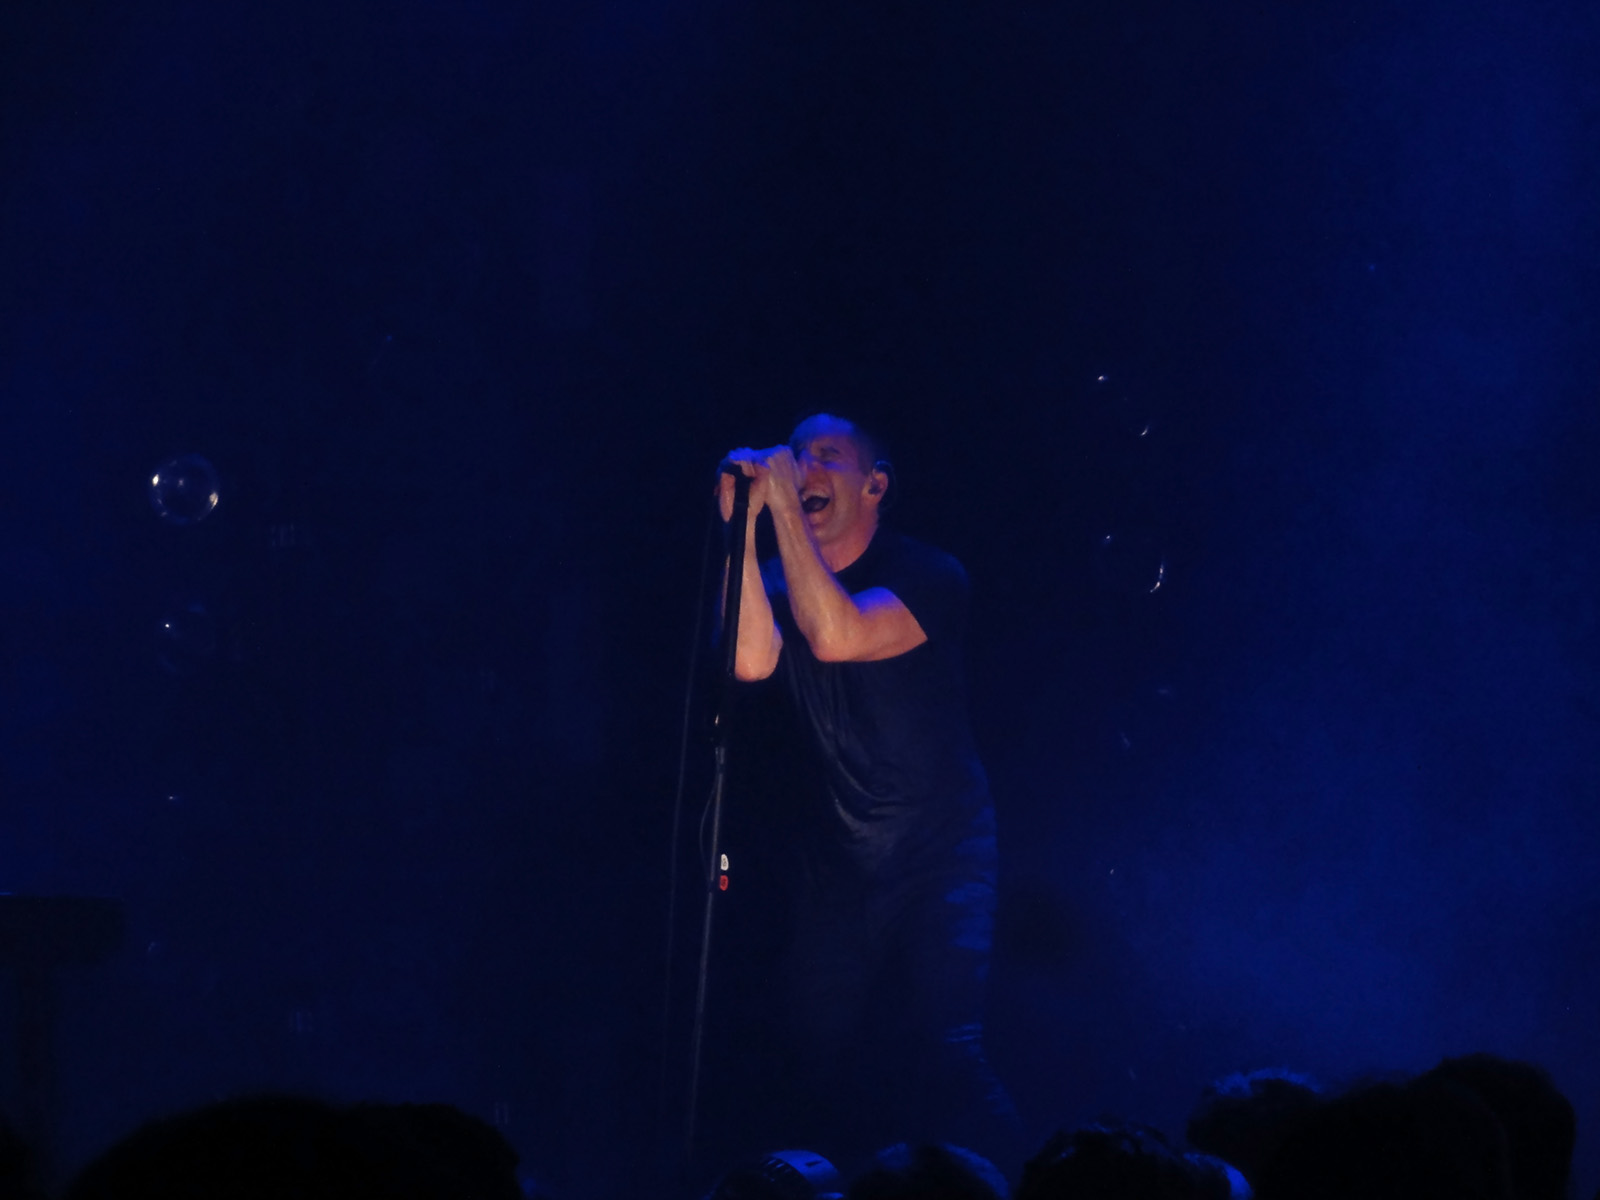 the singer is singing in front of a blue crowd